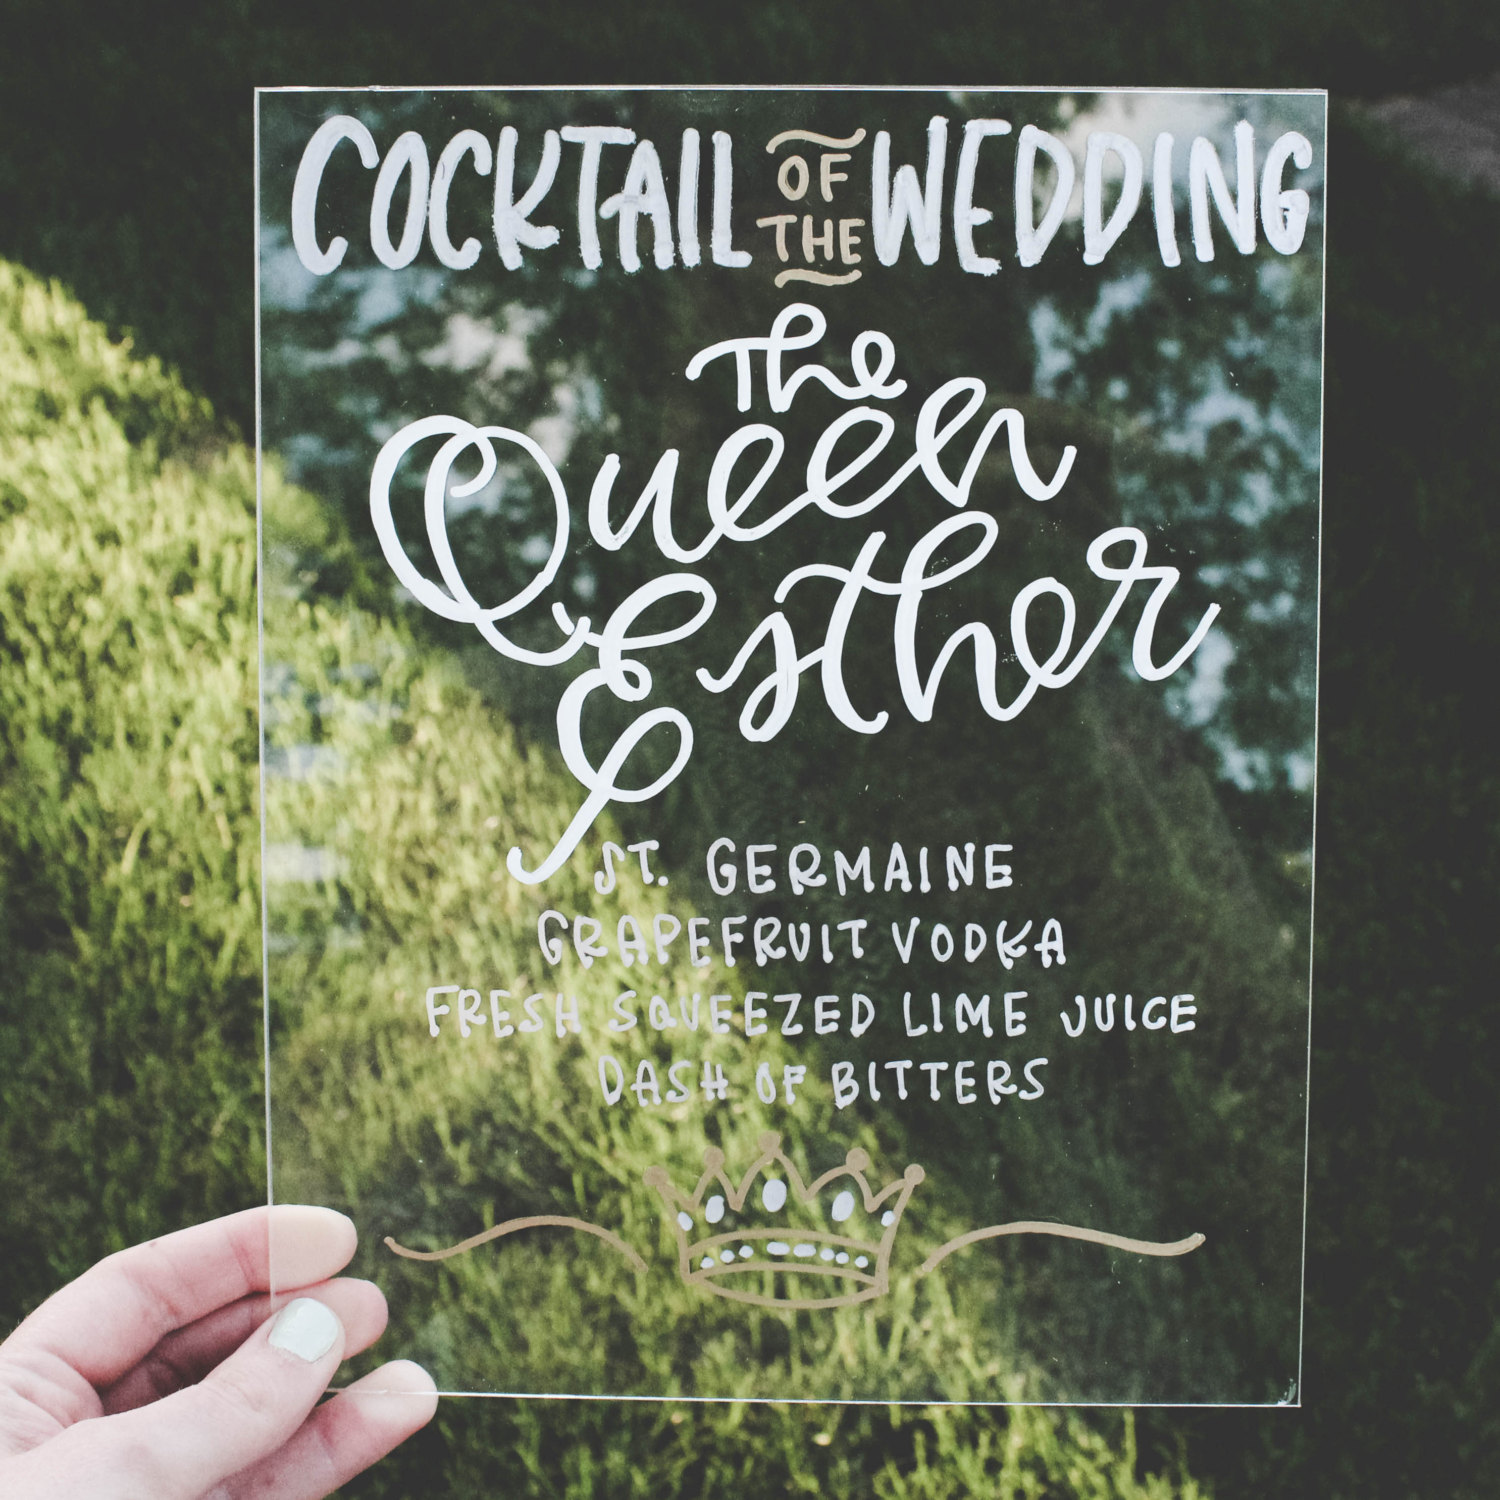 Acrylic signs for weddings are a fun new trend we love! This hand-lettering is beautiful. By Wanderlove Press Co. via https://emmalinebride.com/decor/acrylic-signs-for-weddings/